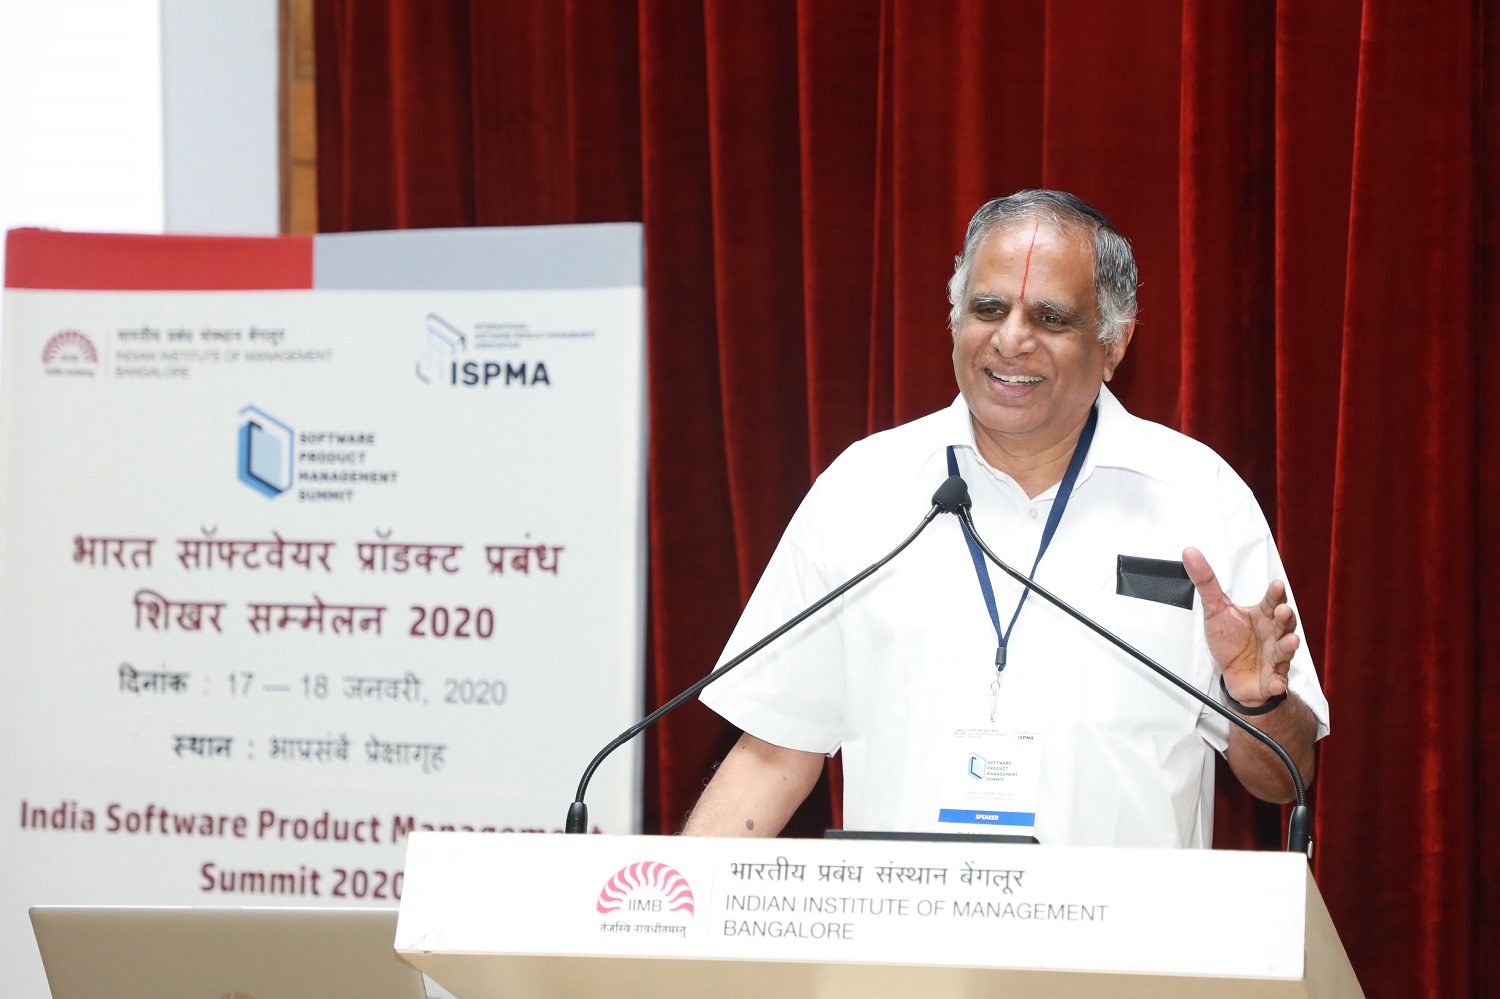 Prof. S Sadagopan, Director at IIIT Bangalore, takes the audience through the journey of evolution of software products in India over the last four decades, at the India Software Product Management Summit 2020 (ISPMS 2020), being held at IIMB on January 17–18, 2020. 